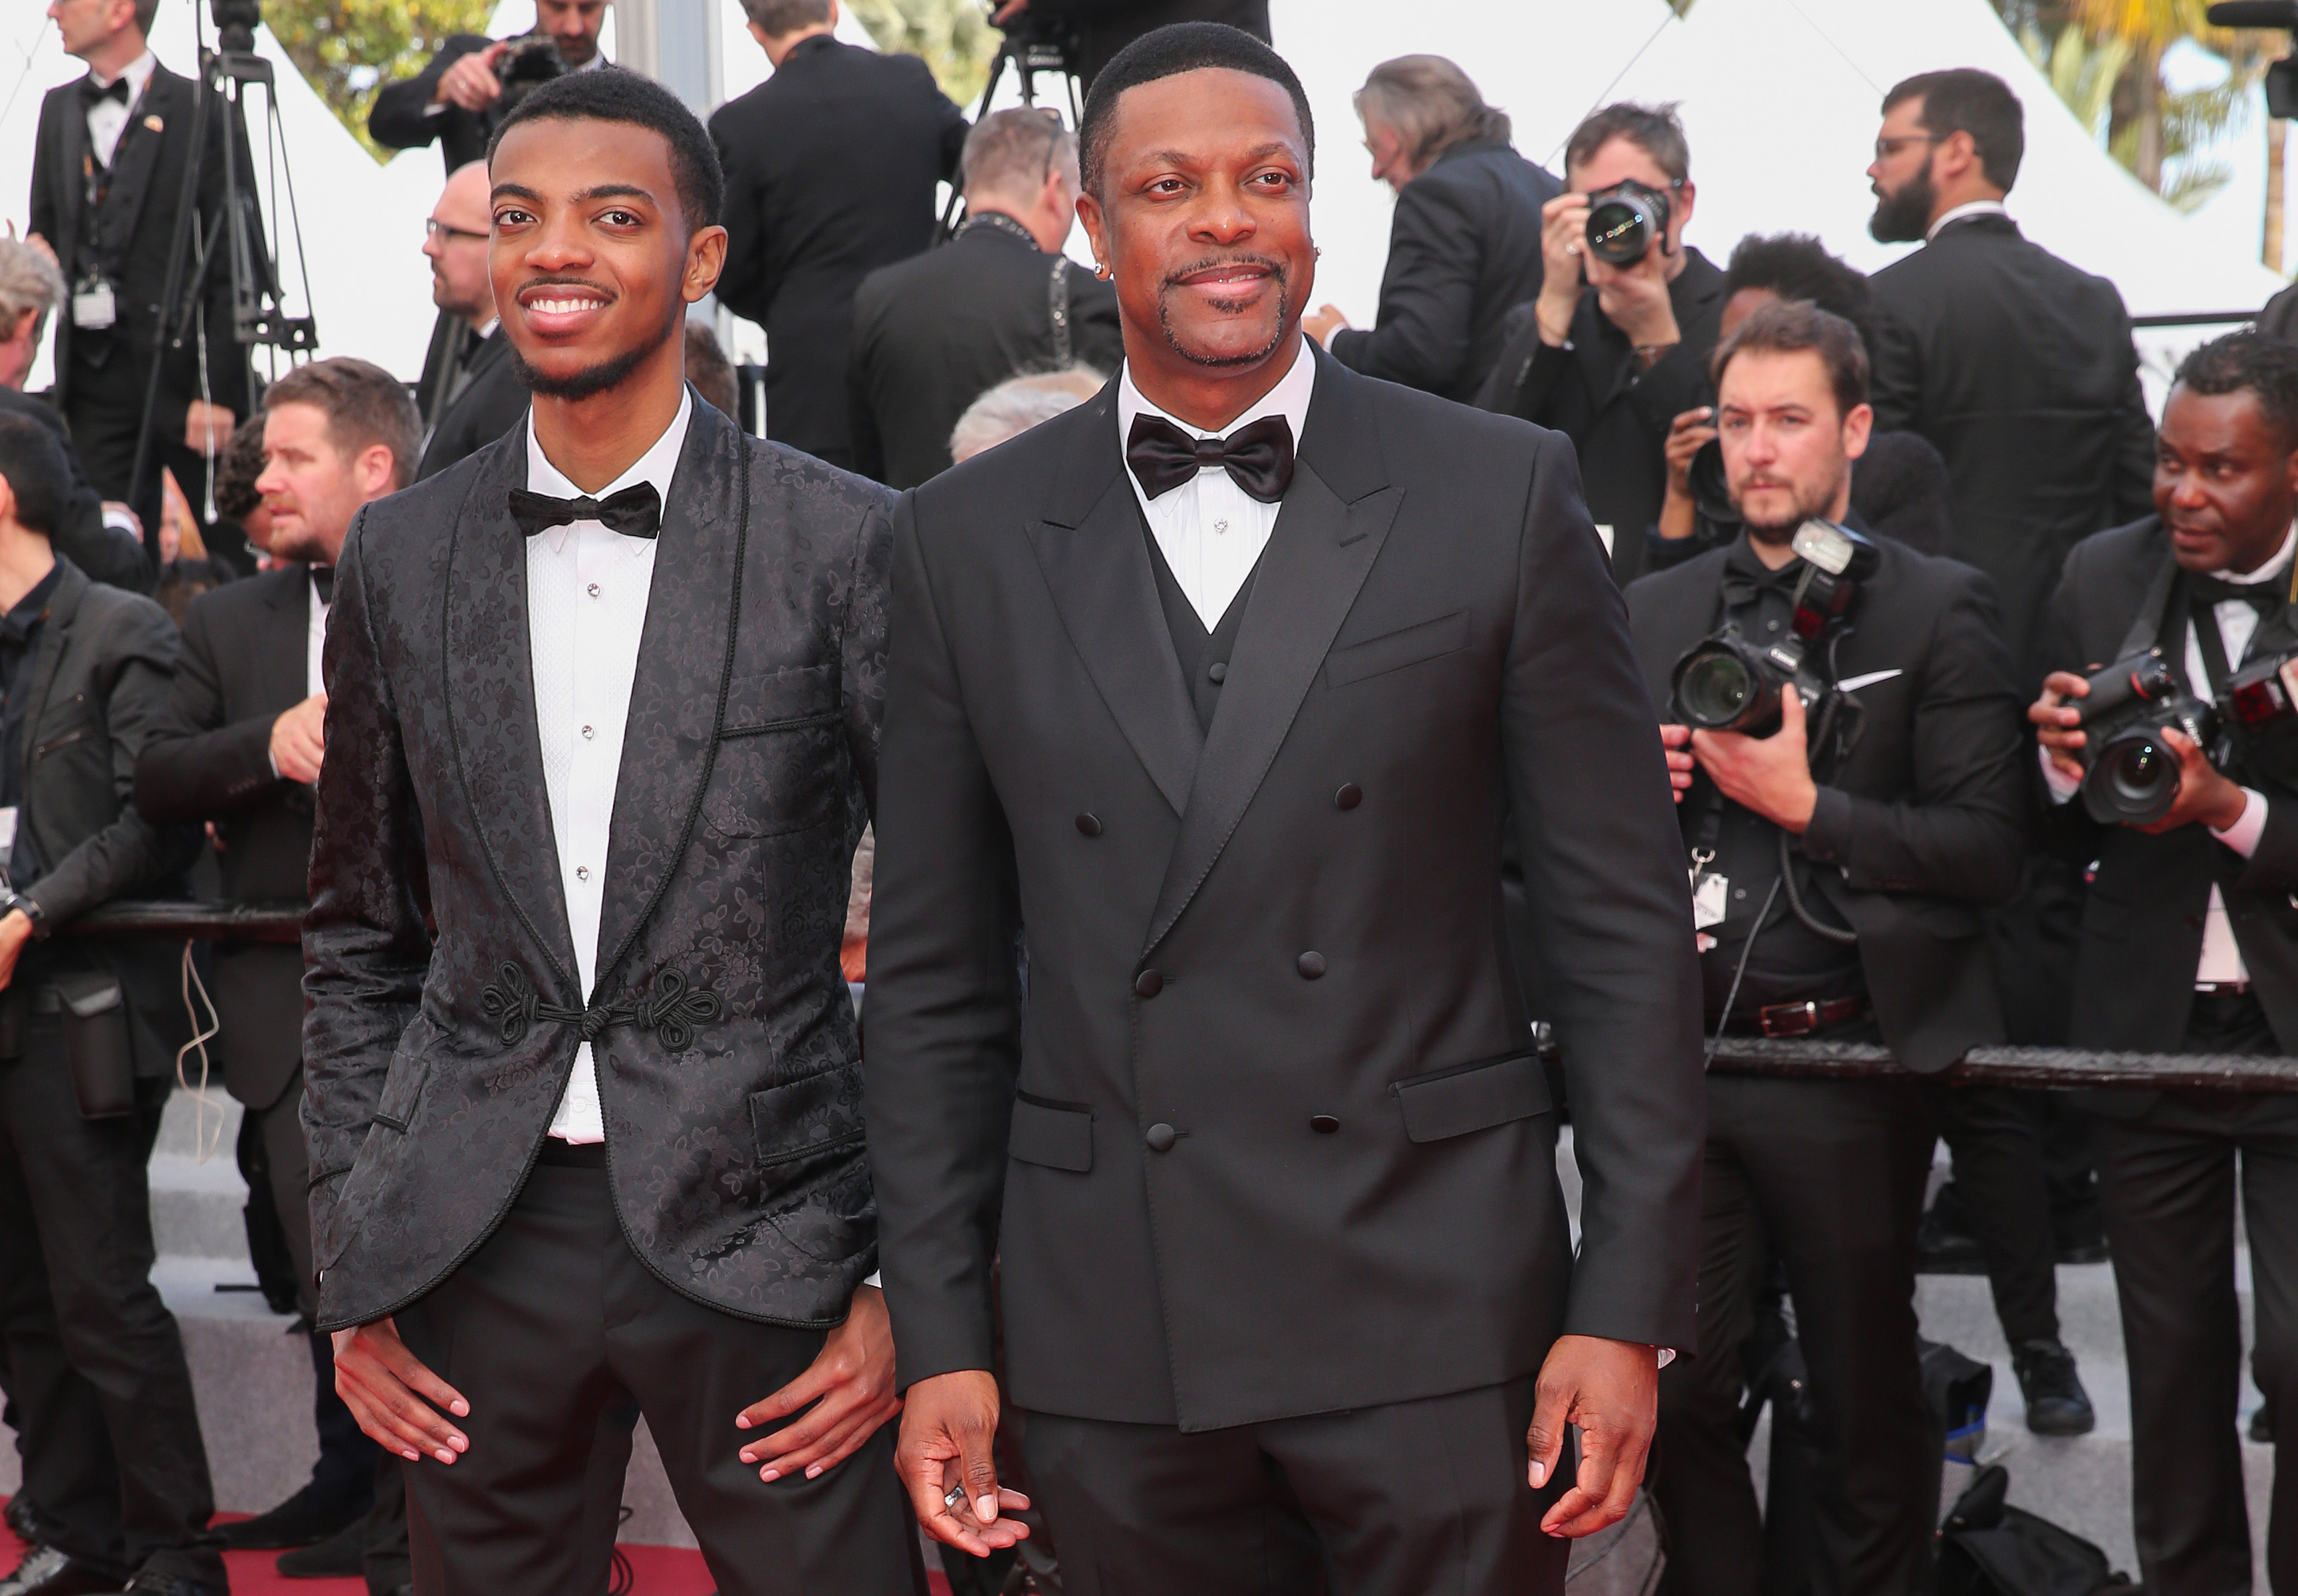 Destin Christopher Tucker and Chris Tucker during the screening of "Once Upon A Time In Hollywood" at the 72nd annual Cannes Film Festival on May 21, 2019 in Cannes, France. | Source: Getty Images